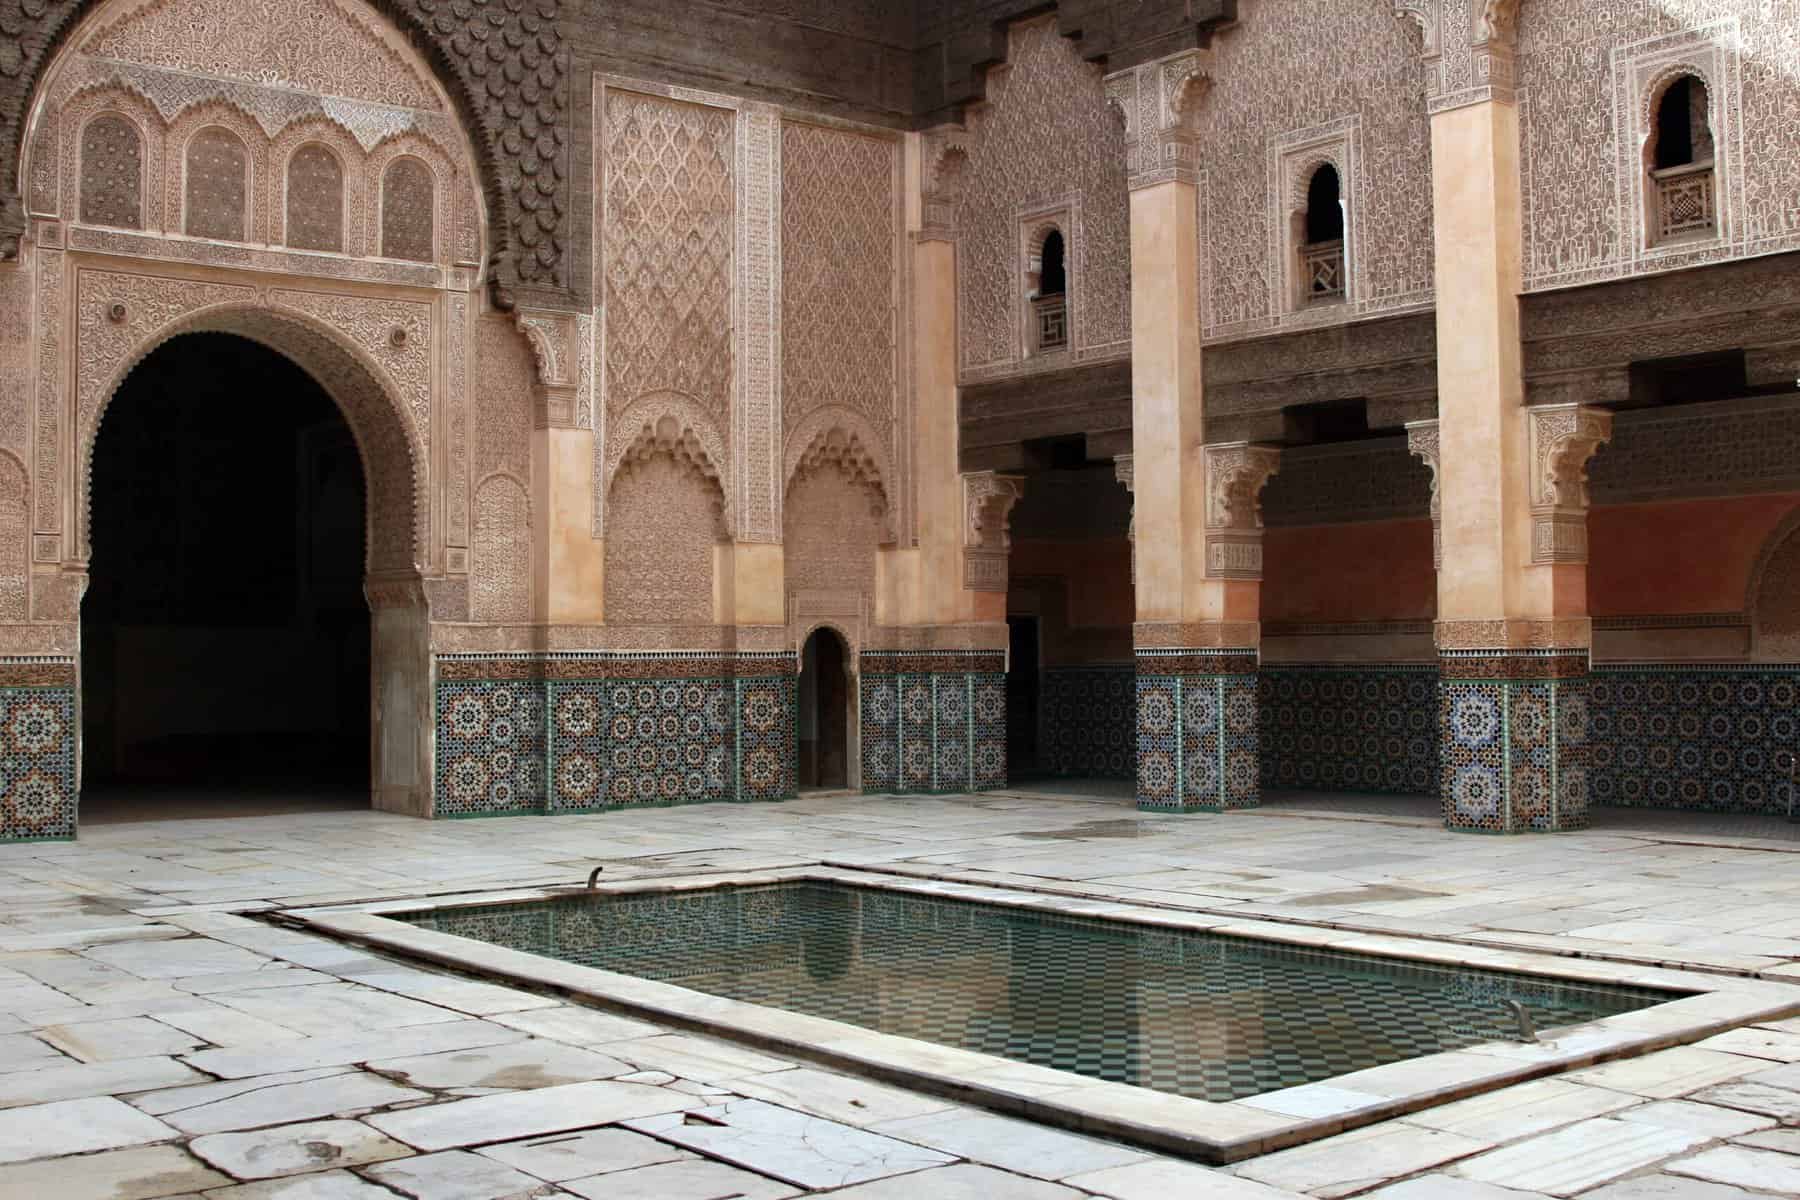 A pool in the Ben Youssef Mosque in Morocco is shown with the mosque as the backdrop.